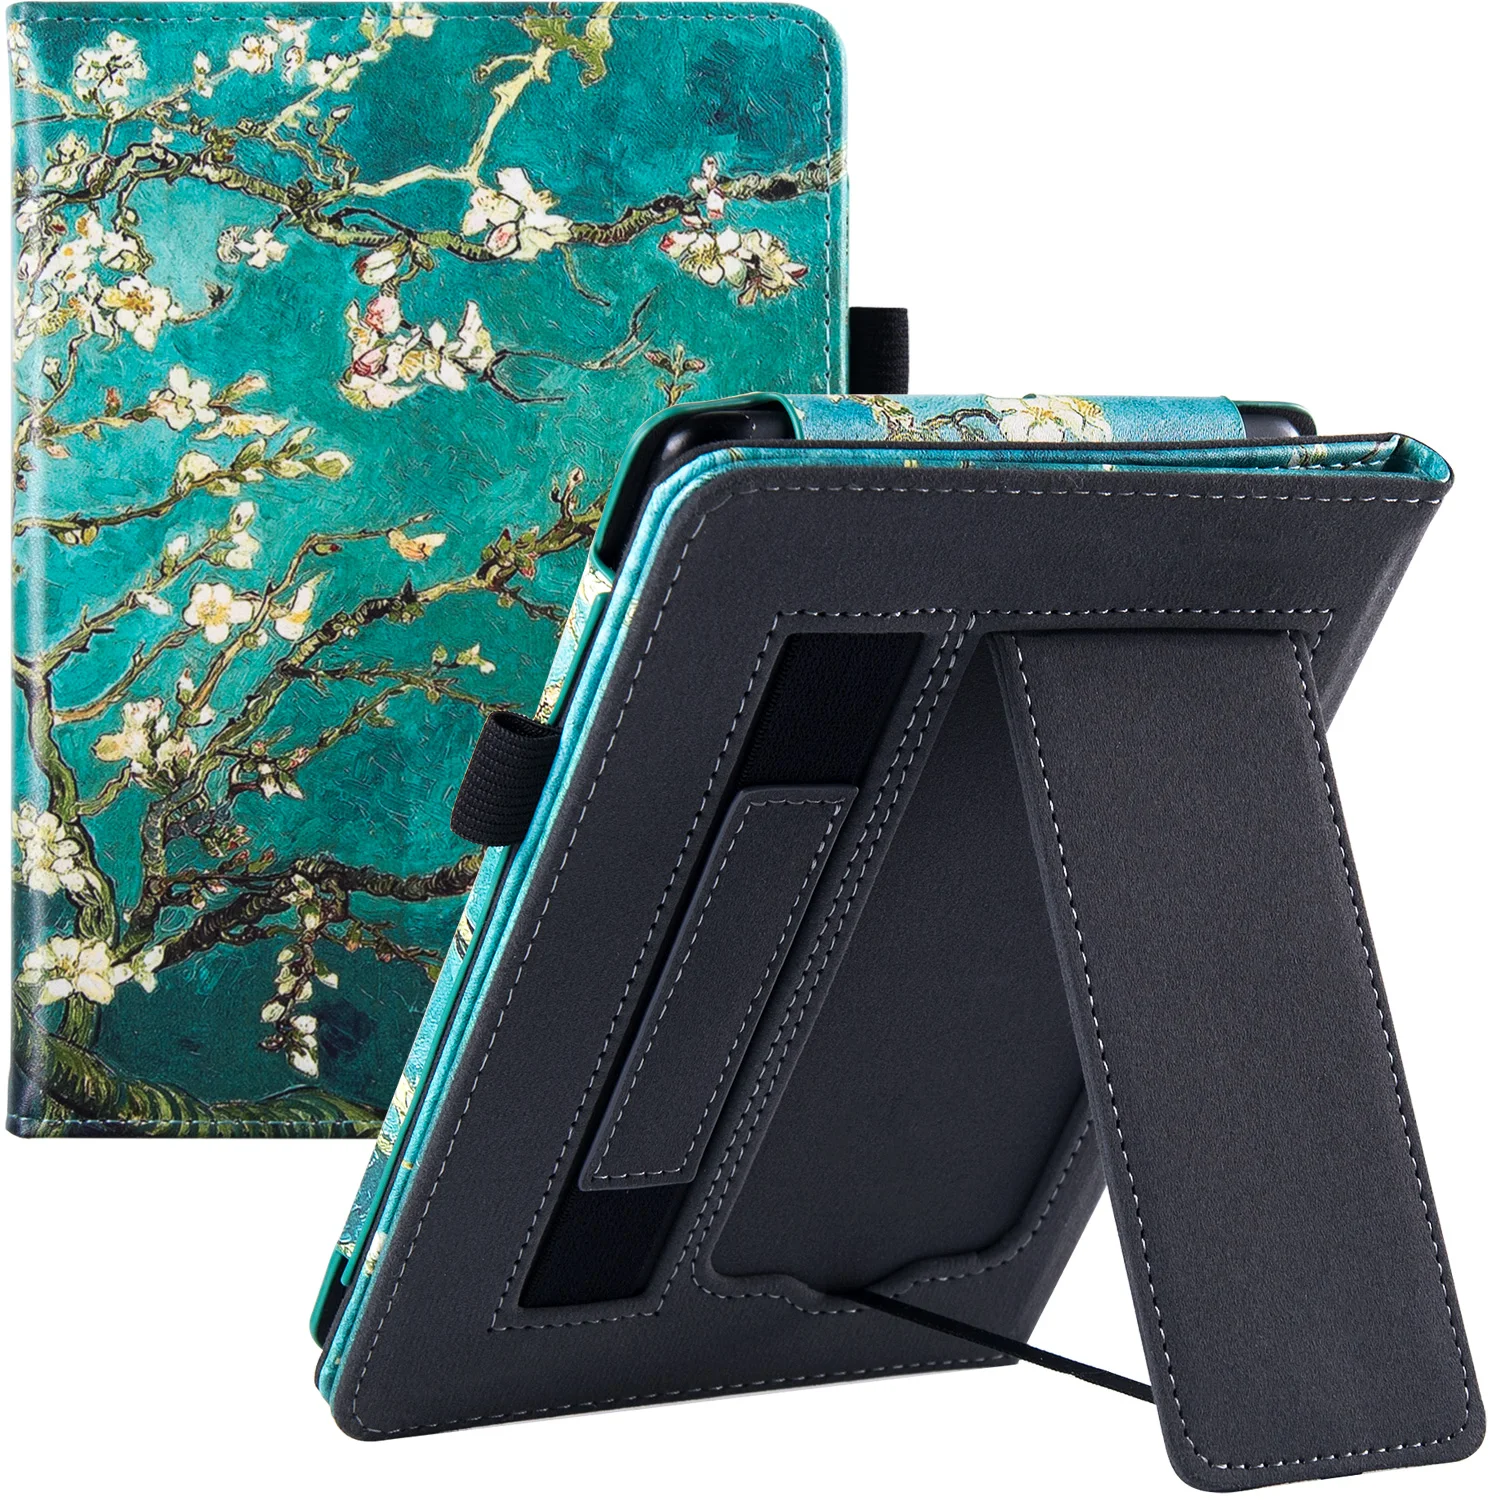 Kindle Paperwhite 11th Generation Case with Stand/Hand Strap (6.8 inch 2021 Released) - PU Leather Cover with Auto Sleep/Wake